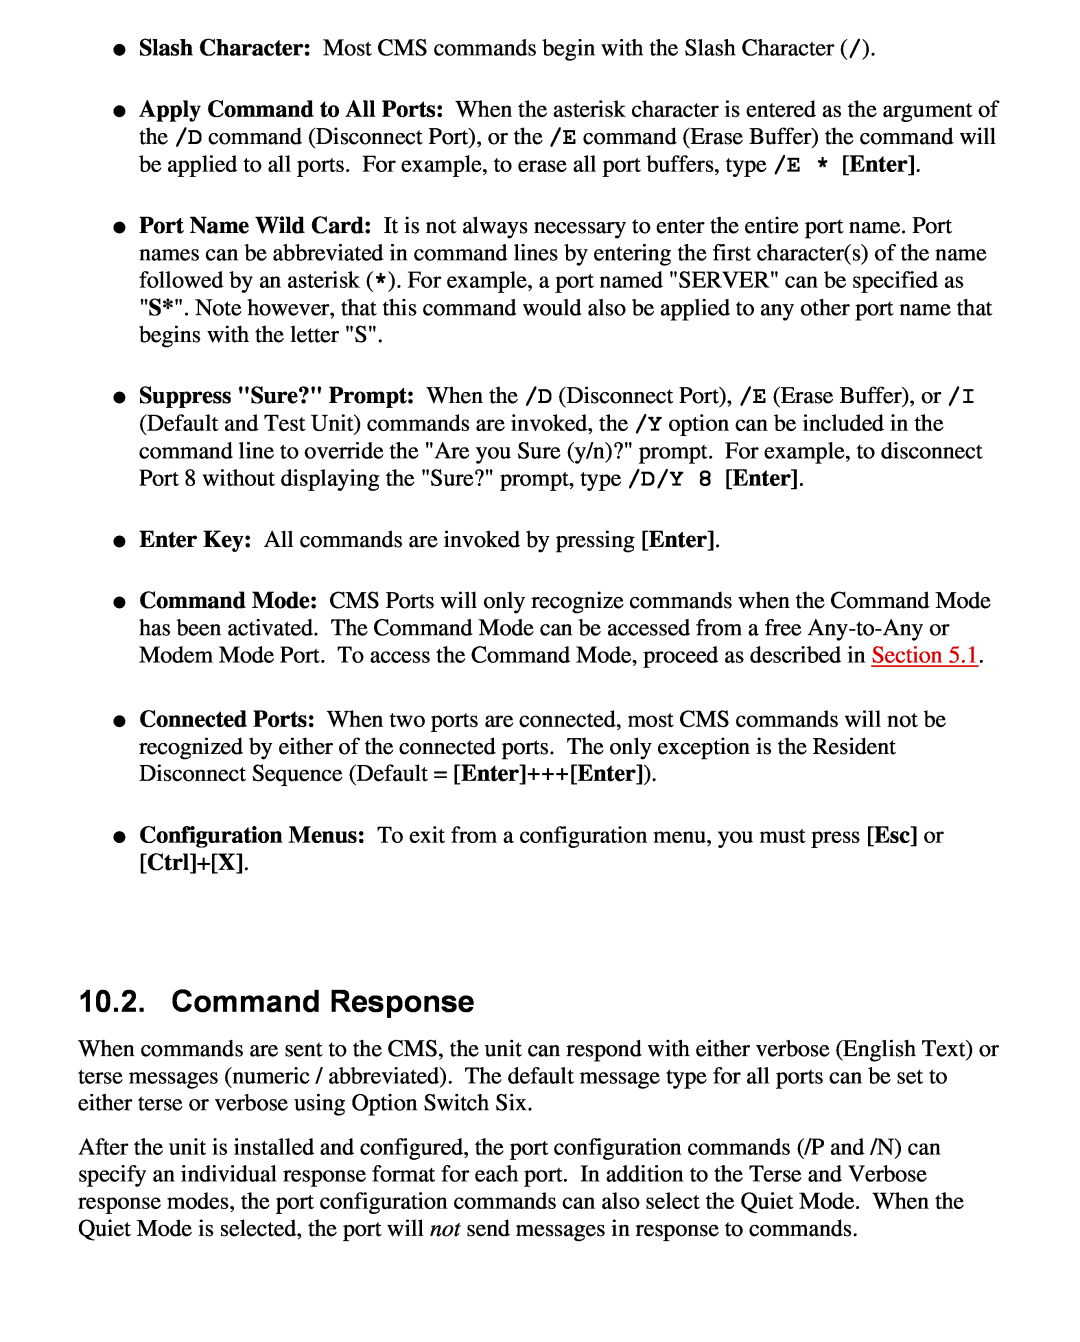 Western Telematic CMS-16 manual Command Response 